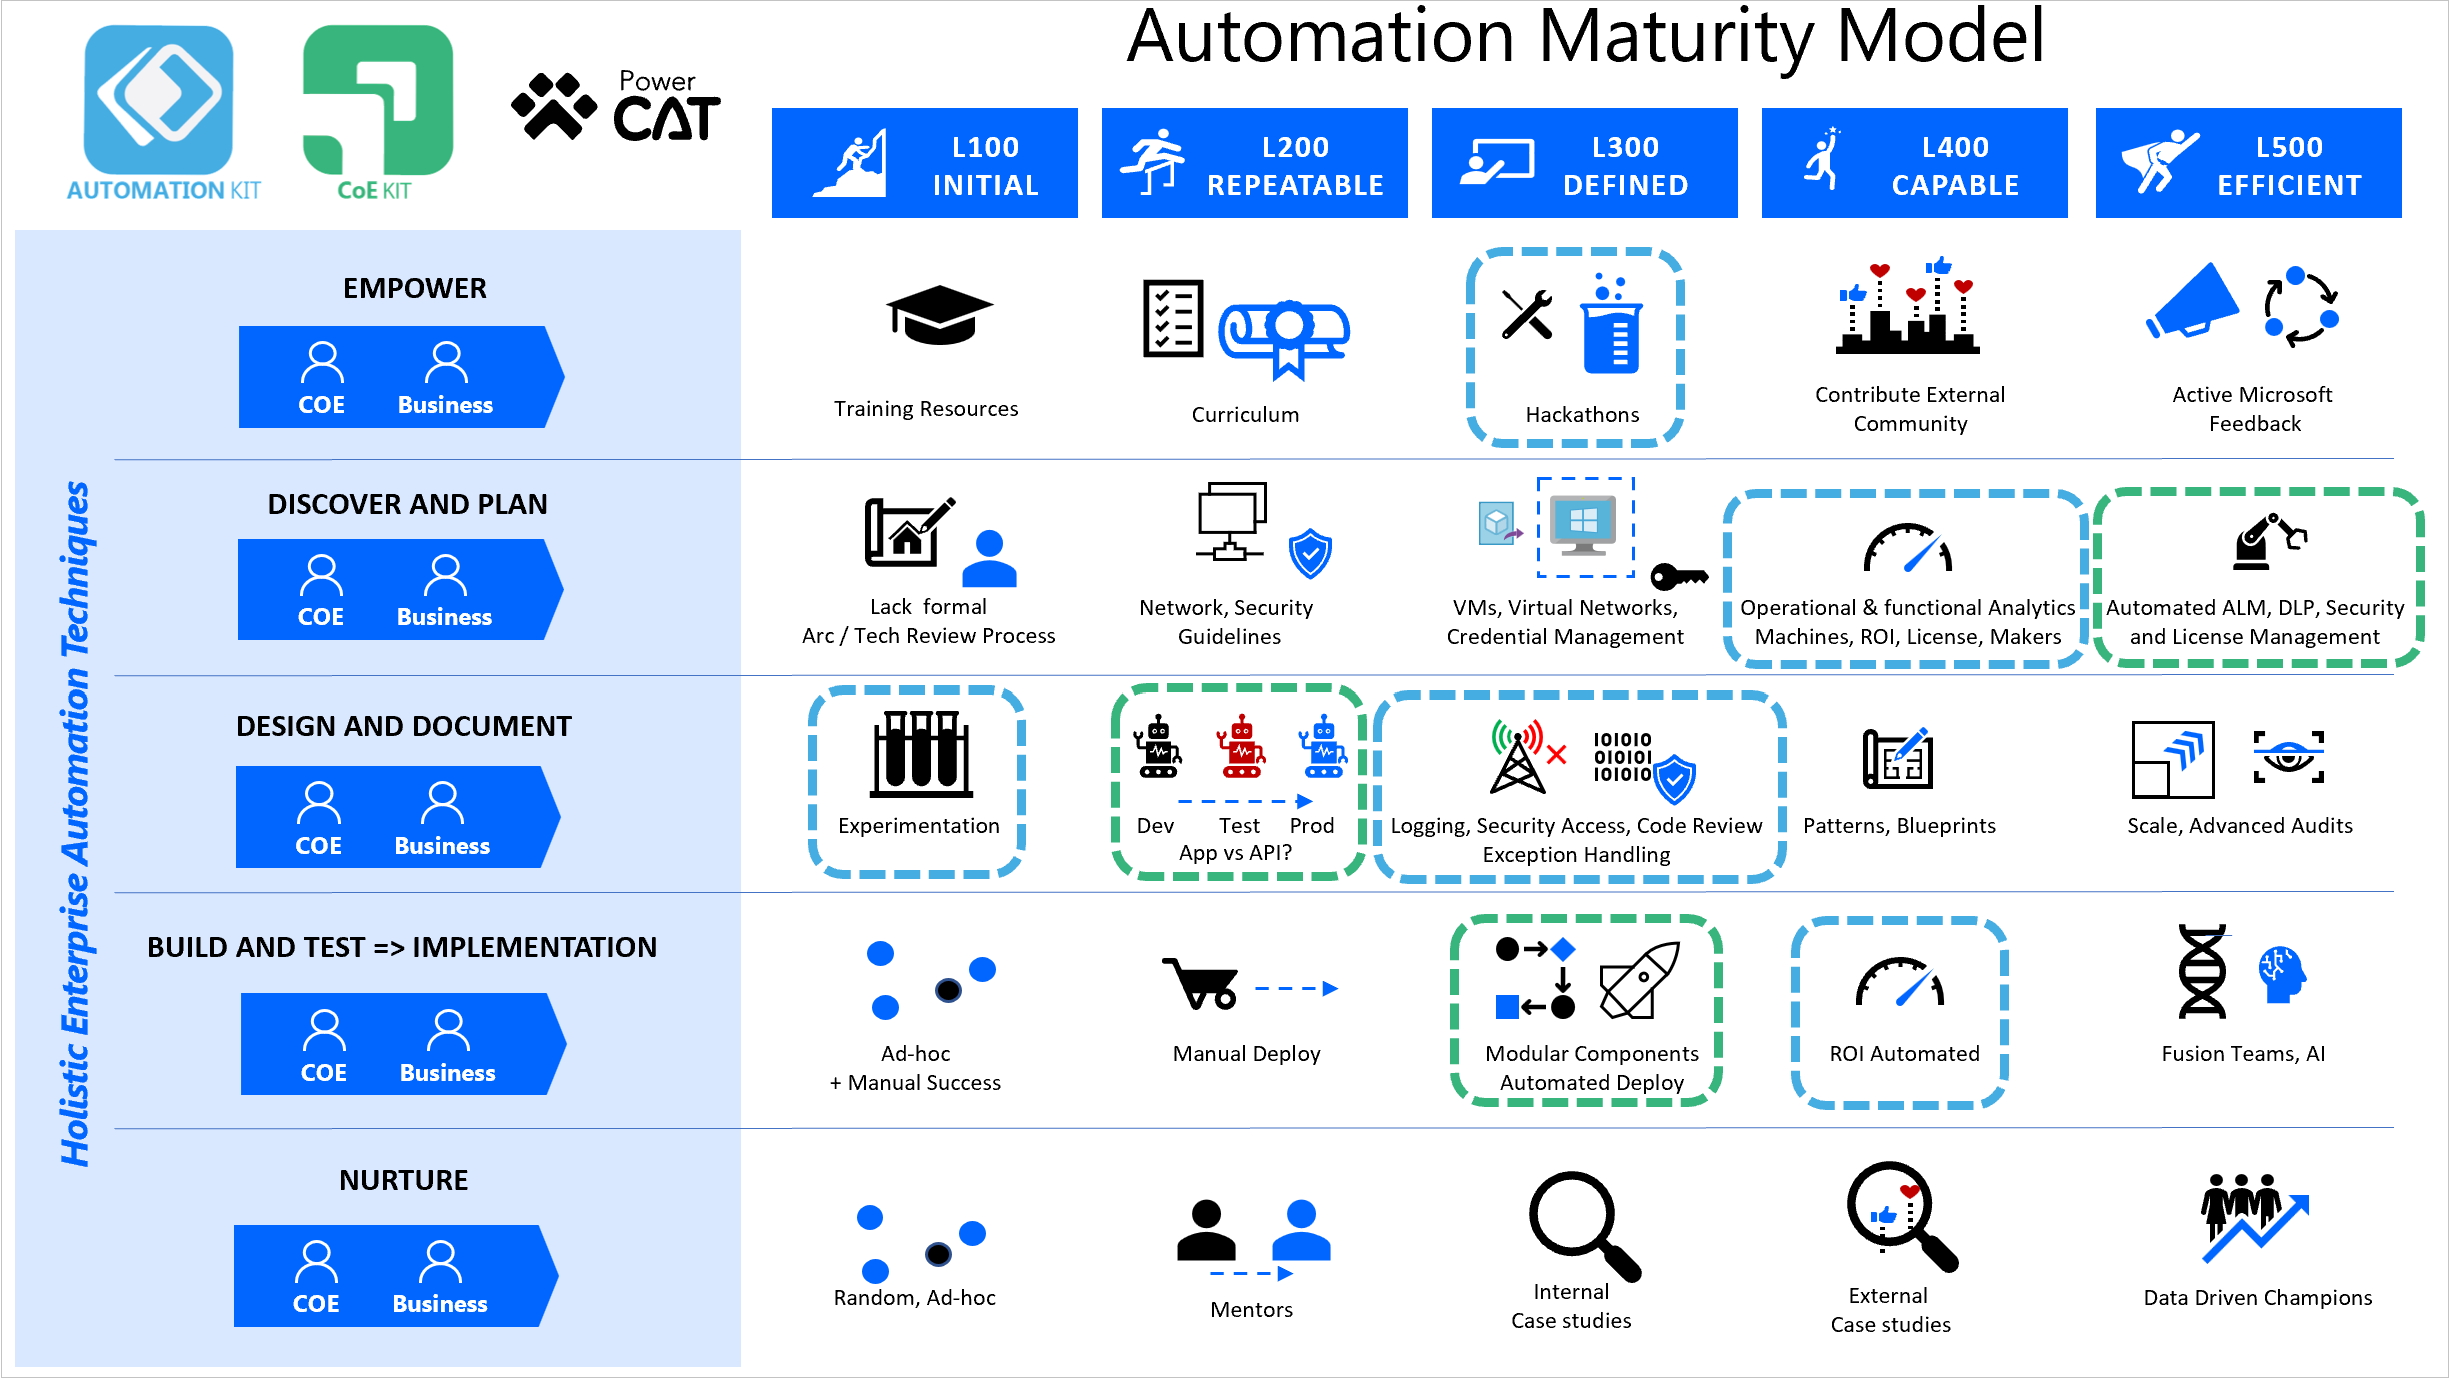 Automation Maturity Model - Mapping to Automation Kit and ALM Accelerator